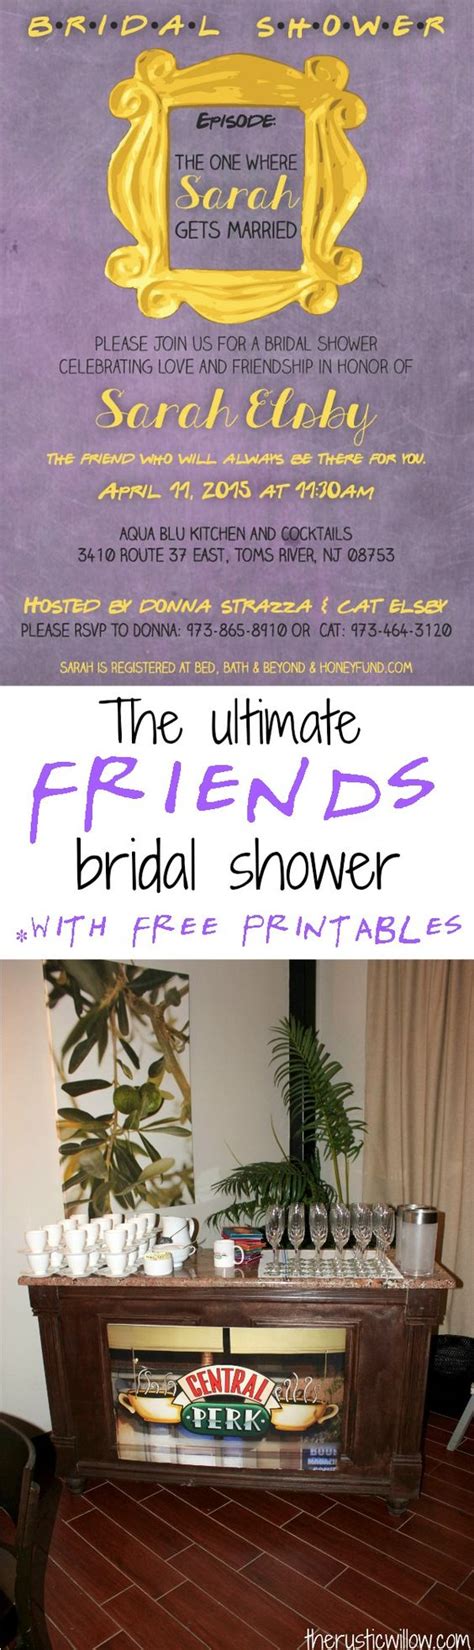 Courteney cox as monica geller. The Ultimate Friends TV Show Bridal Shower | Bridal showers, Printables and Bridal quotes